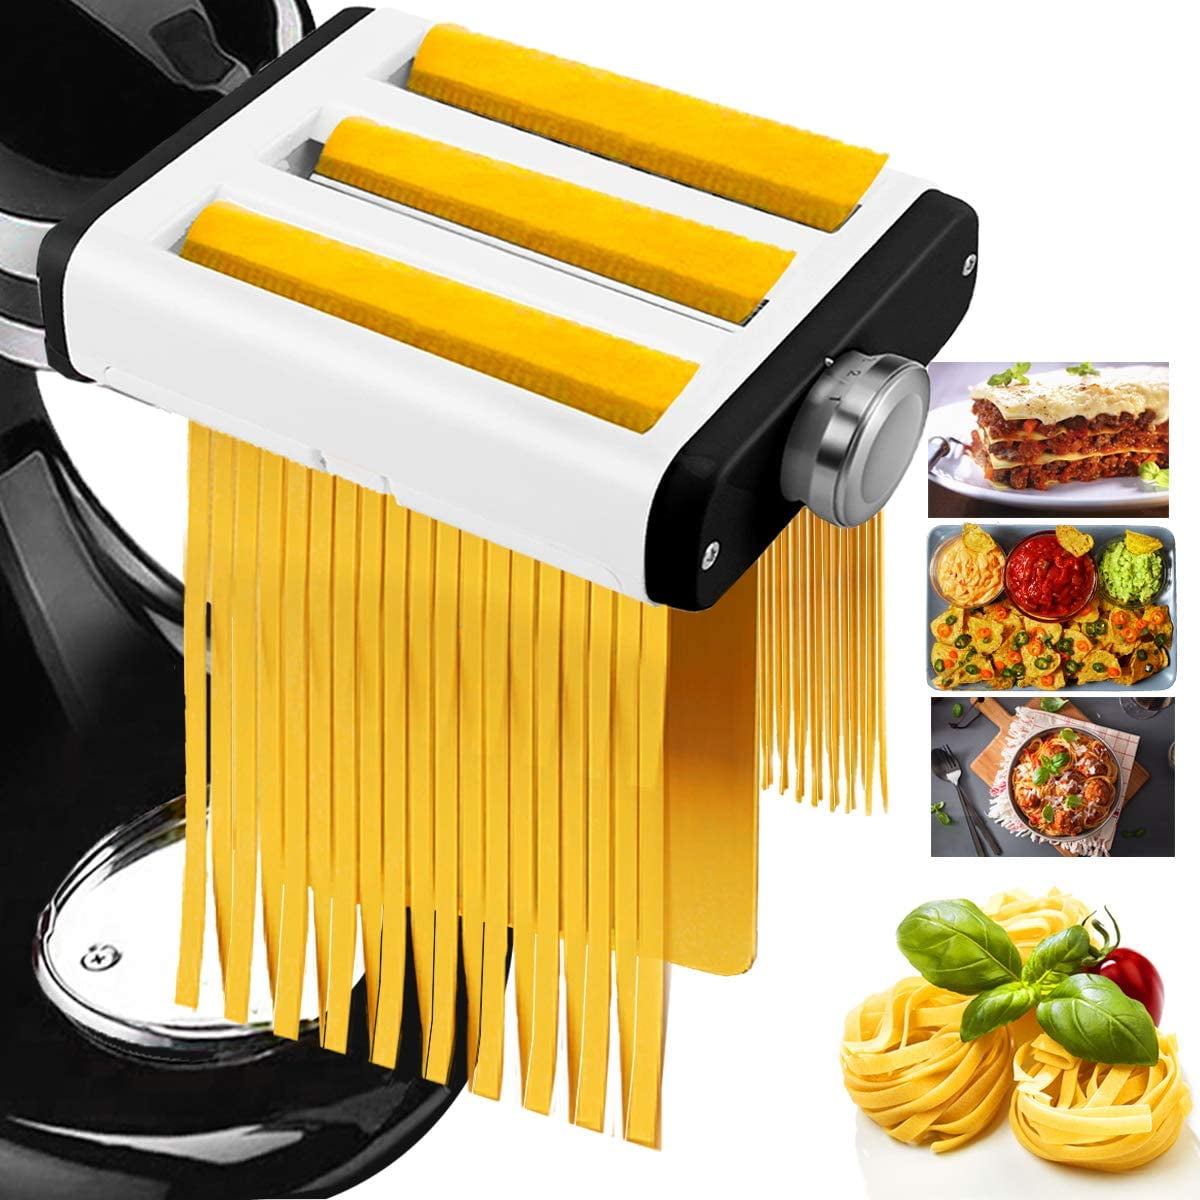 Pasta Maker Attachment for Kitchenaid Mixers, Noodle Maker 3 in 1 Set of  Pasta Sheeter Fettuccine Cutter Spaghetti Cutter and Cleaning Brush,  Kitchen